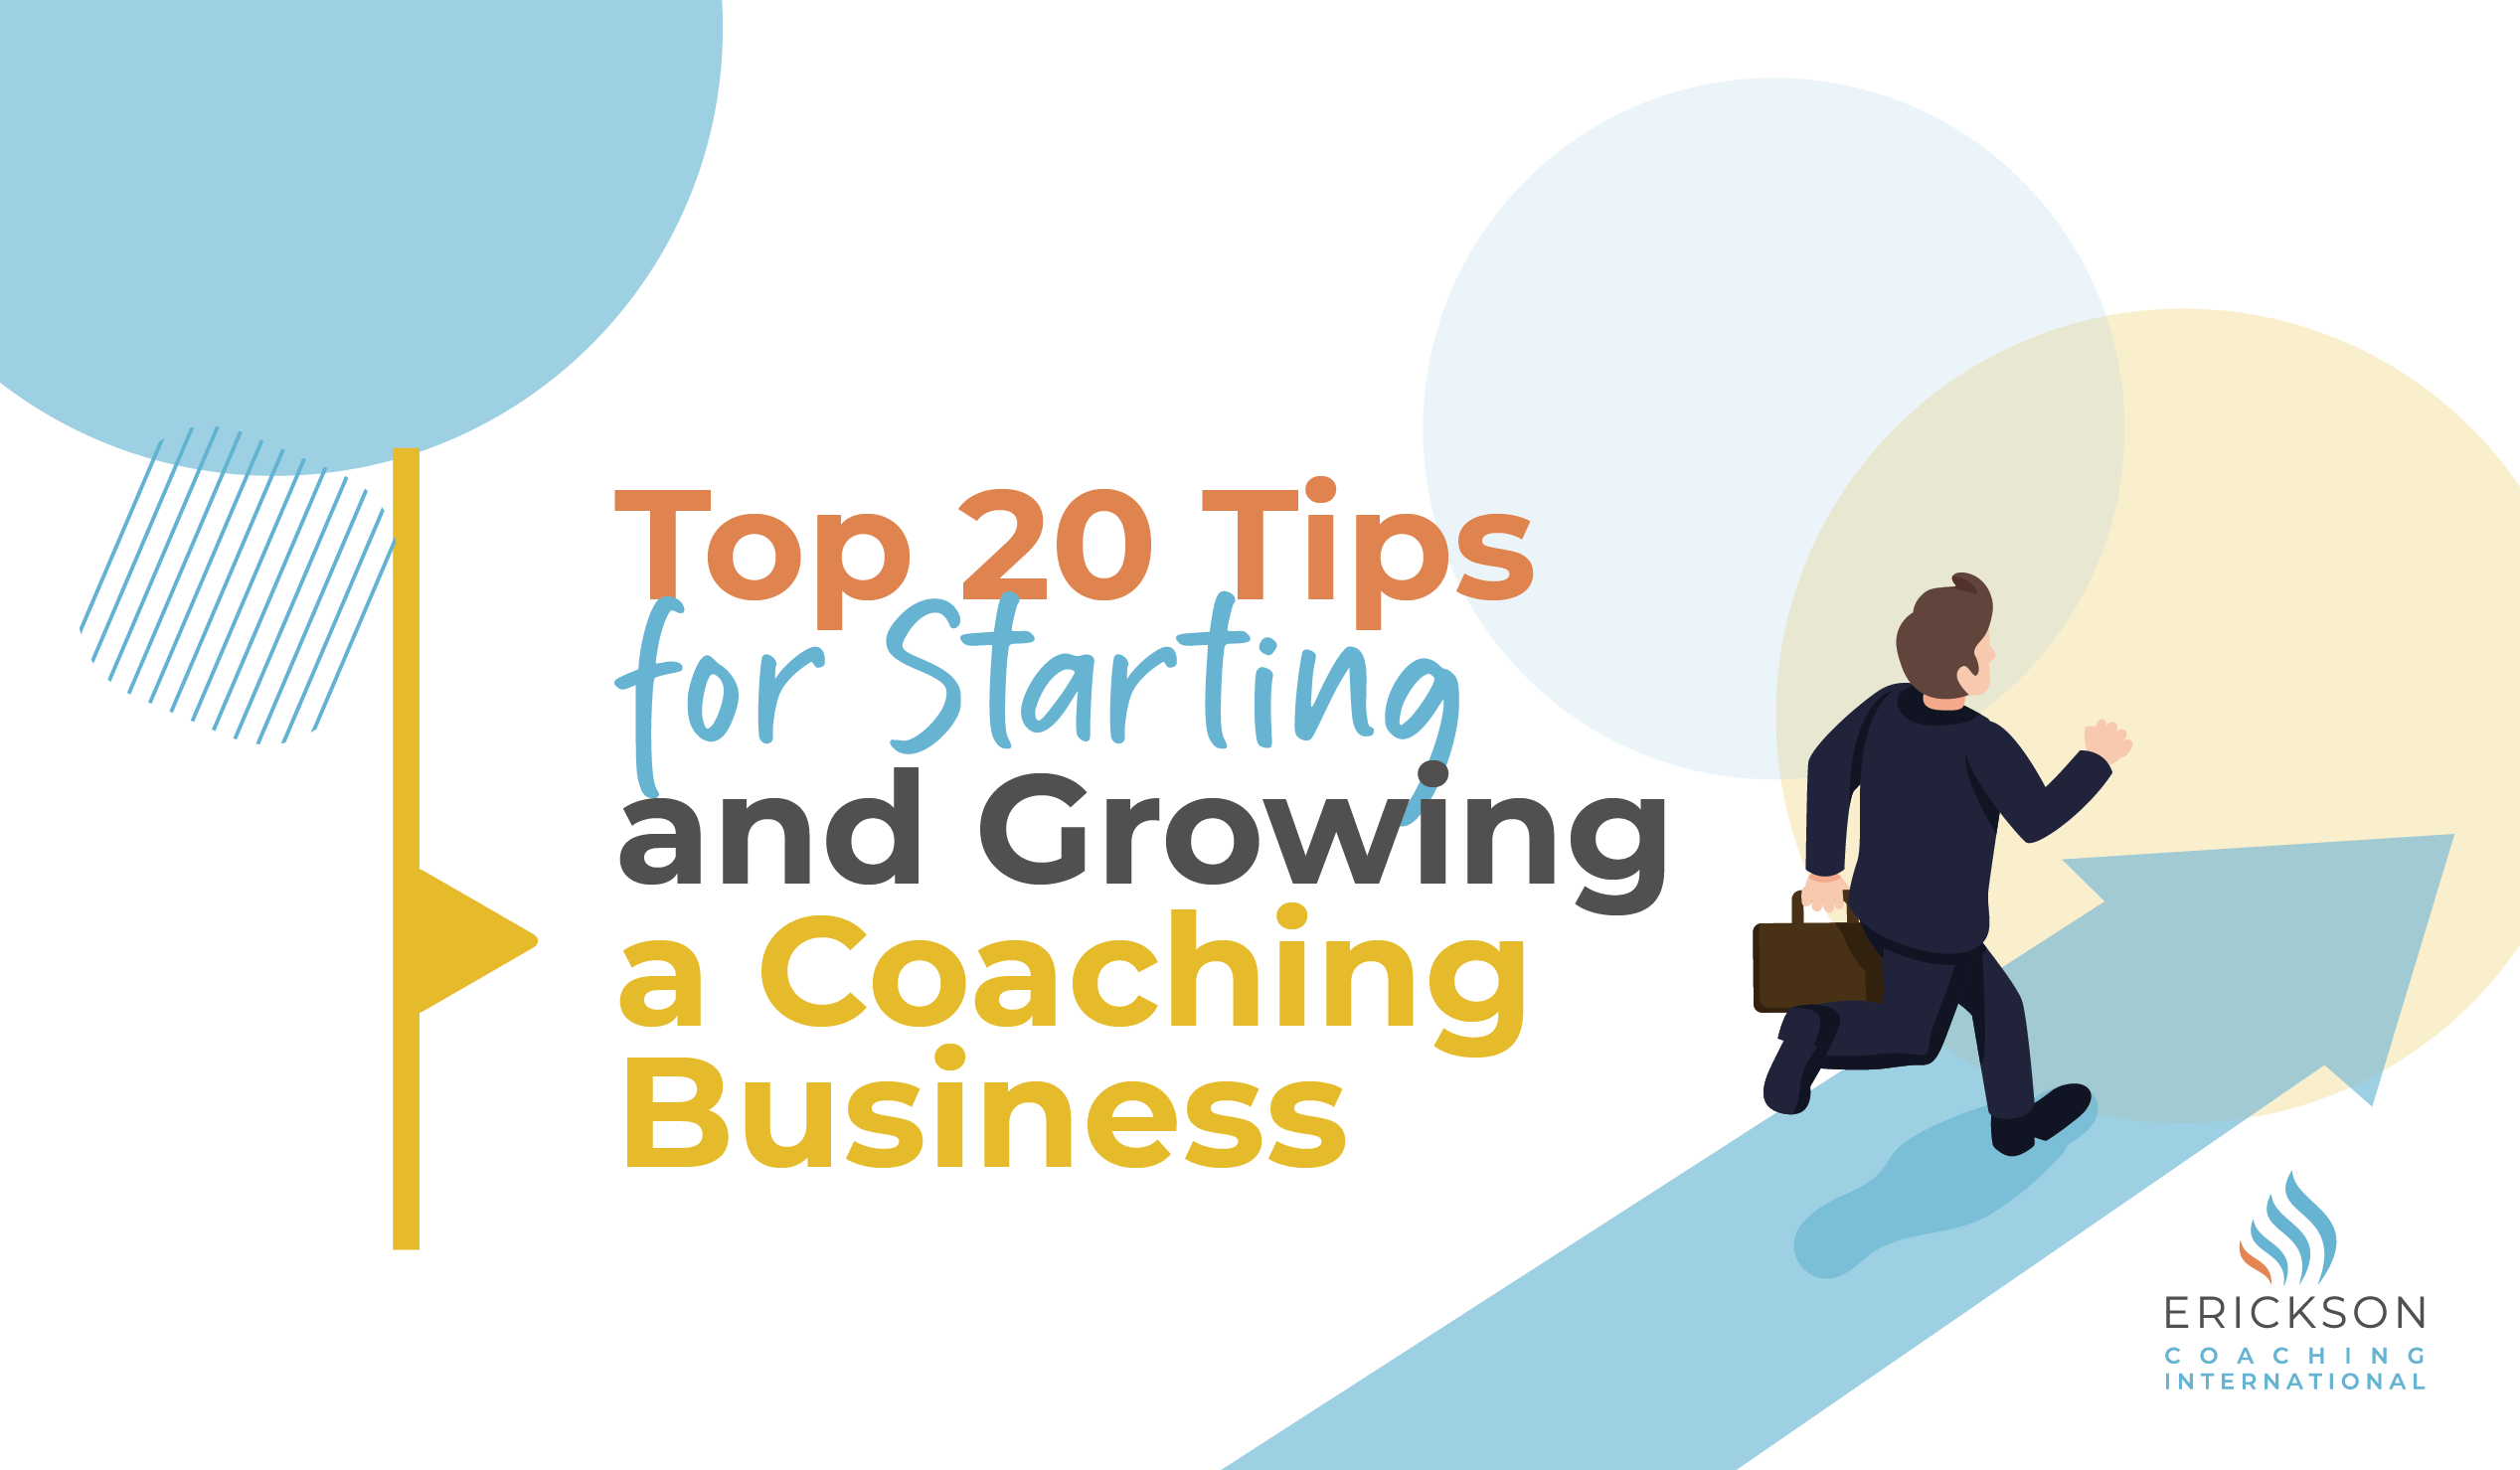 Top 20 Tips for Starting and Growing a Coaching Business